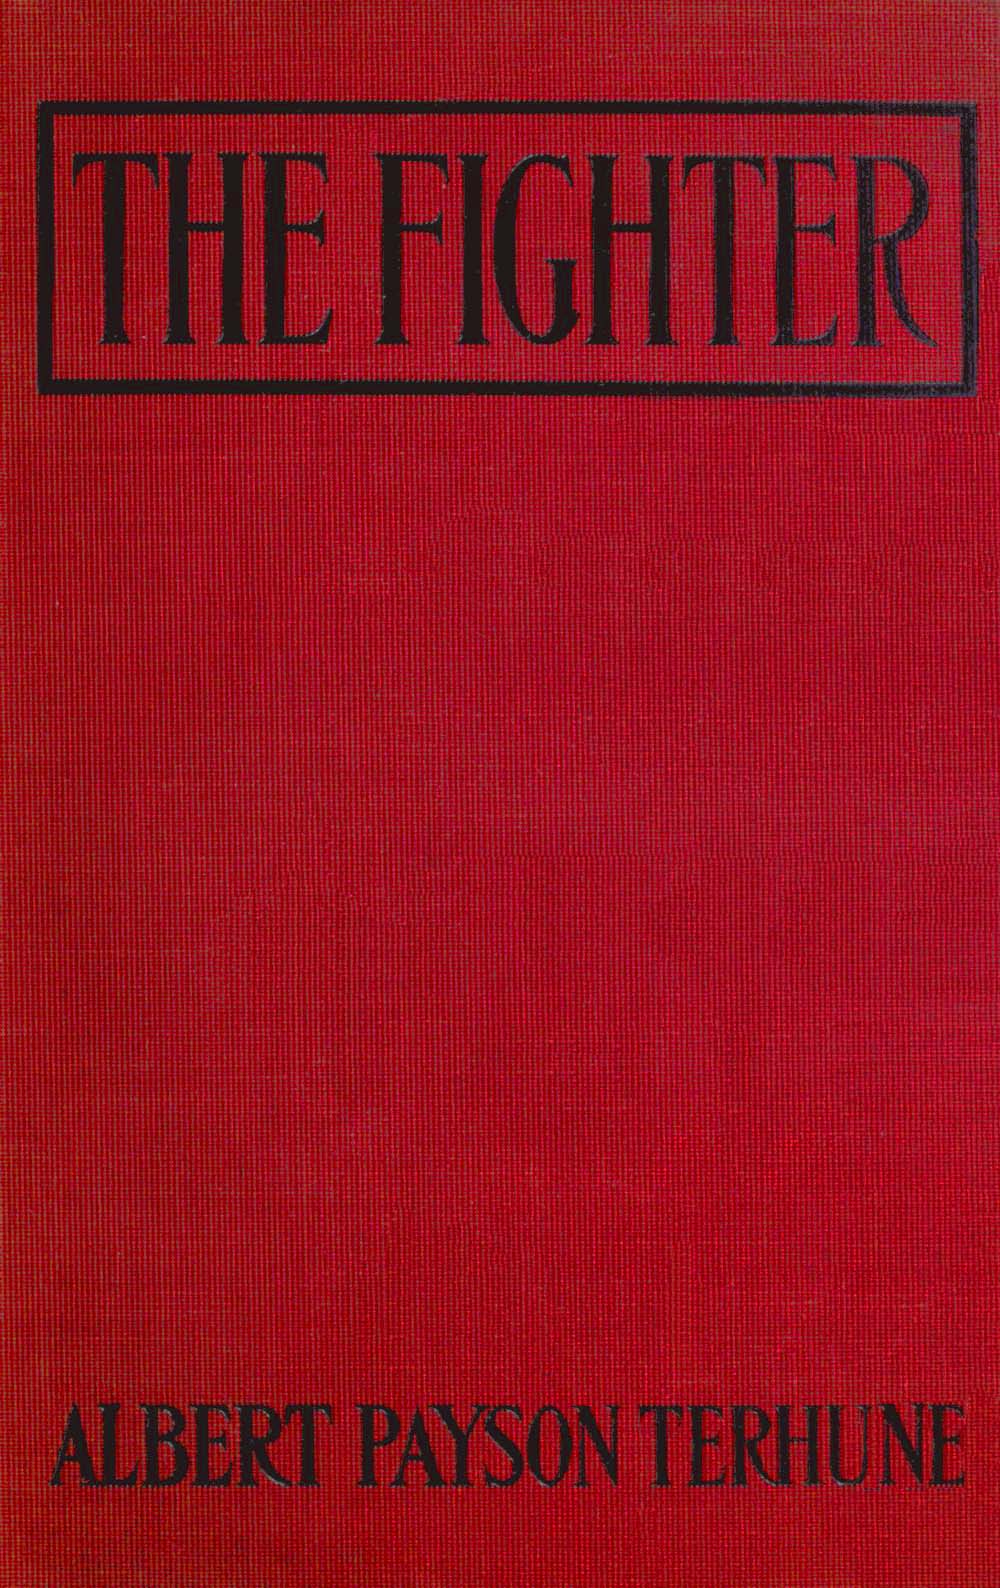 The Fighter, by Albert Payson Terhune—A Project Gutenberg eBook picture